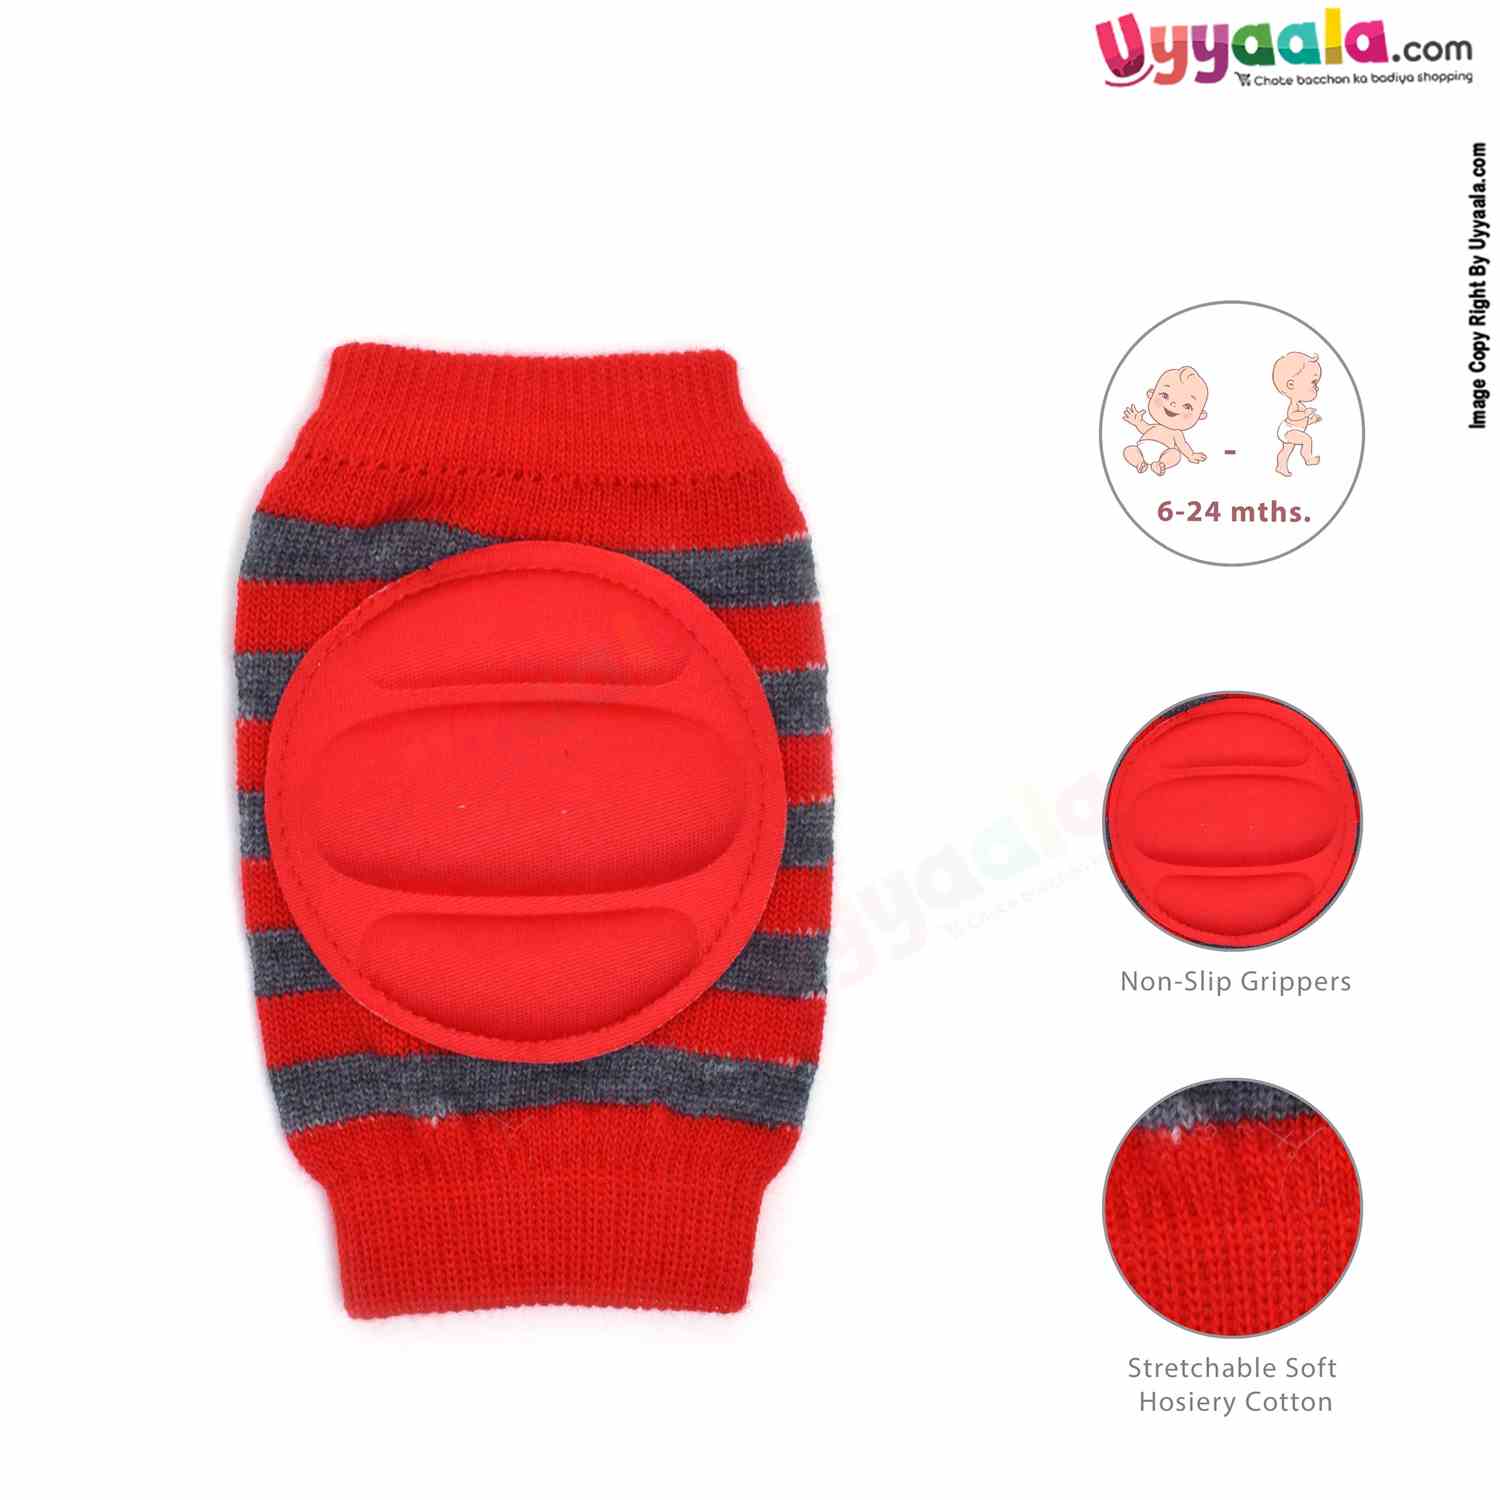 Hosiery Cotton Stretchable Knee Protection Pads for Crawling Babies with Stripes Print Pack of 1 Pair , 6m-2Y Age - Red & Grey